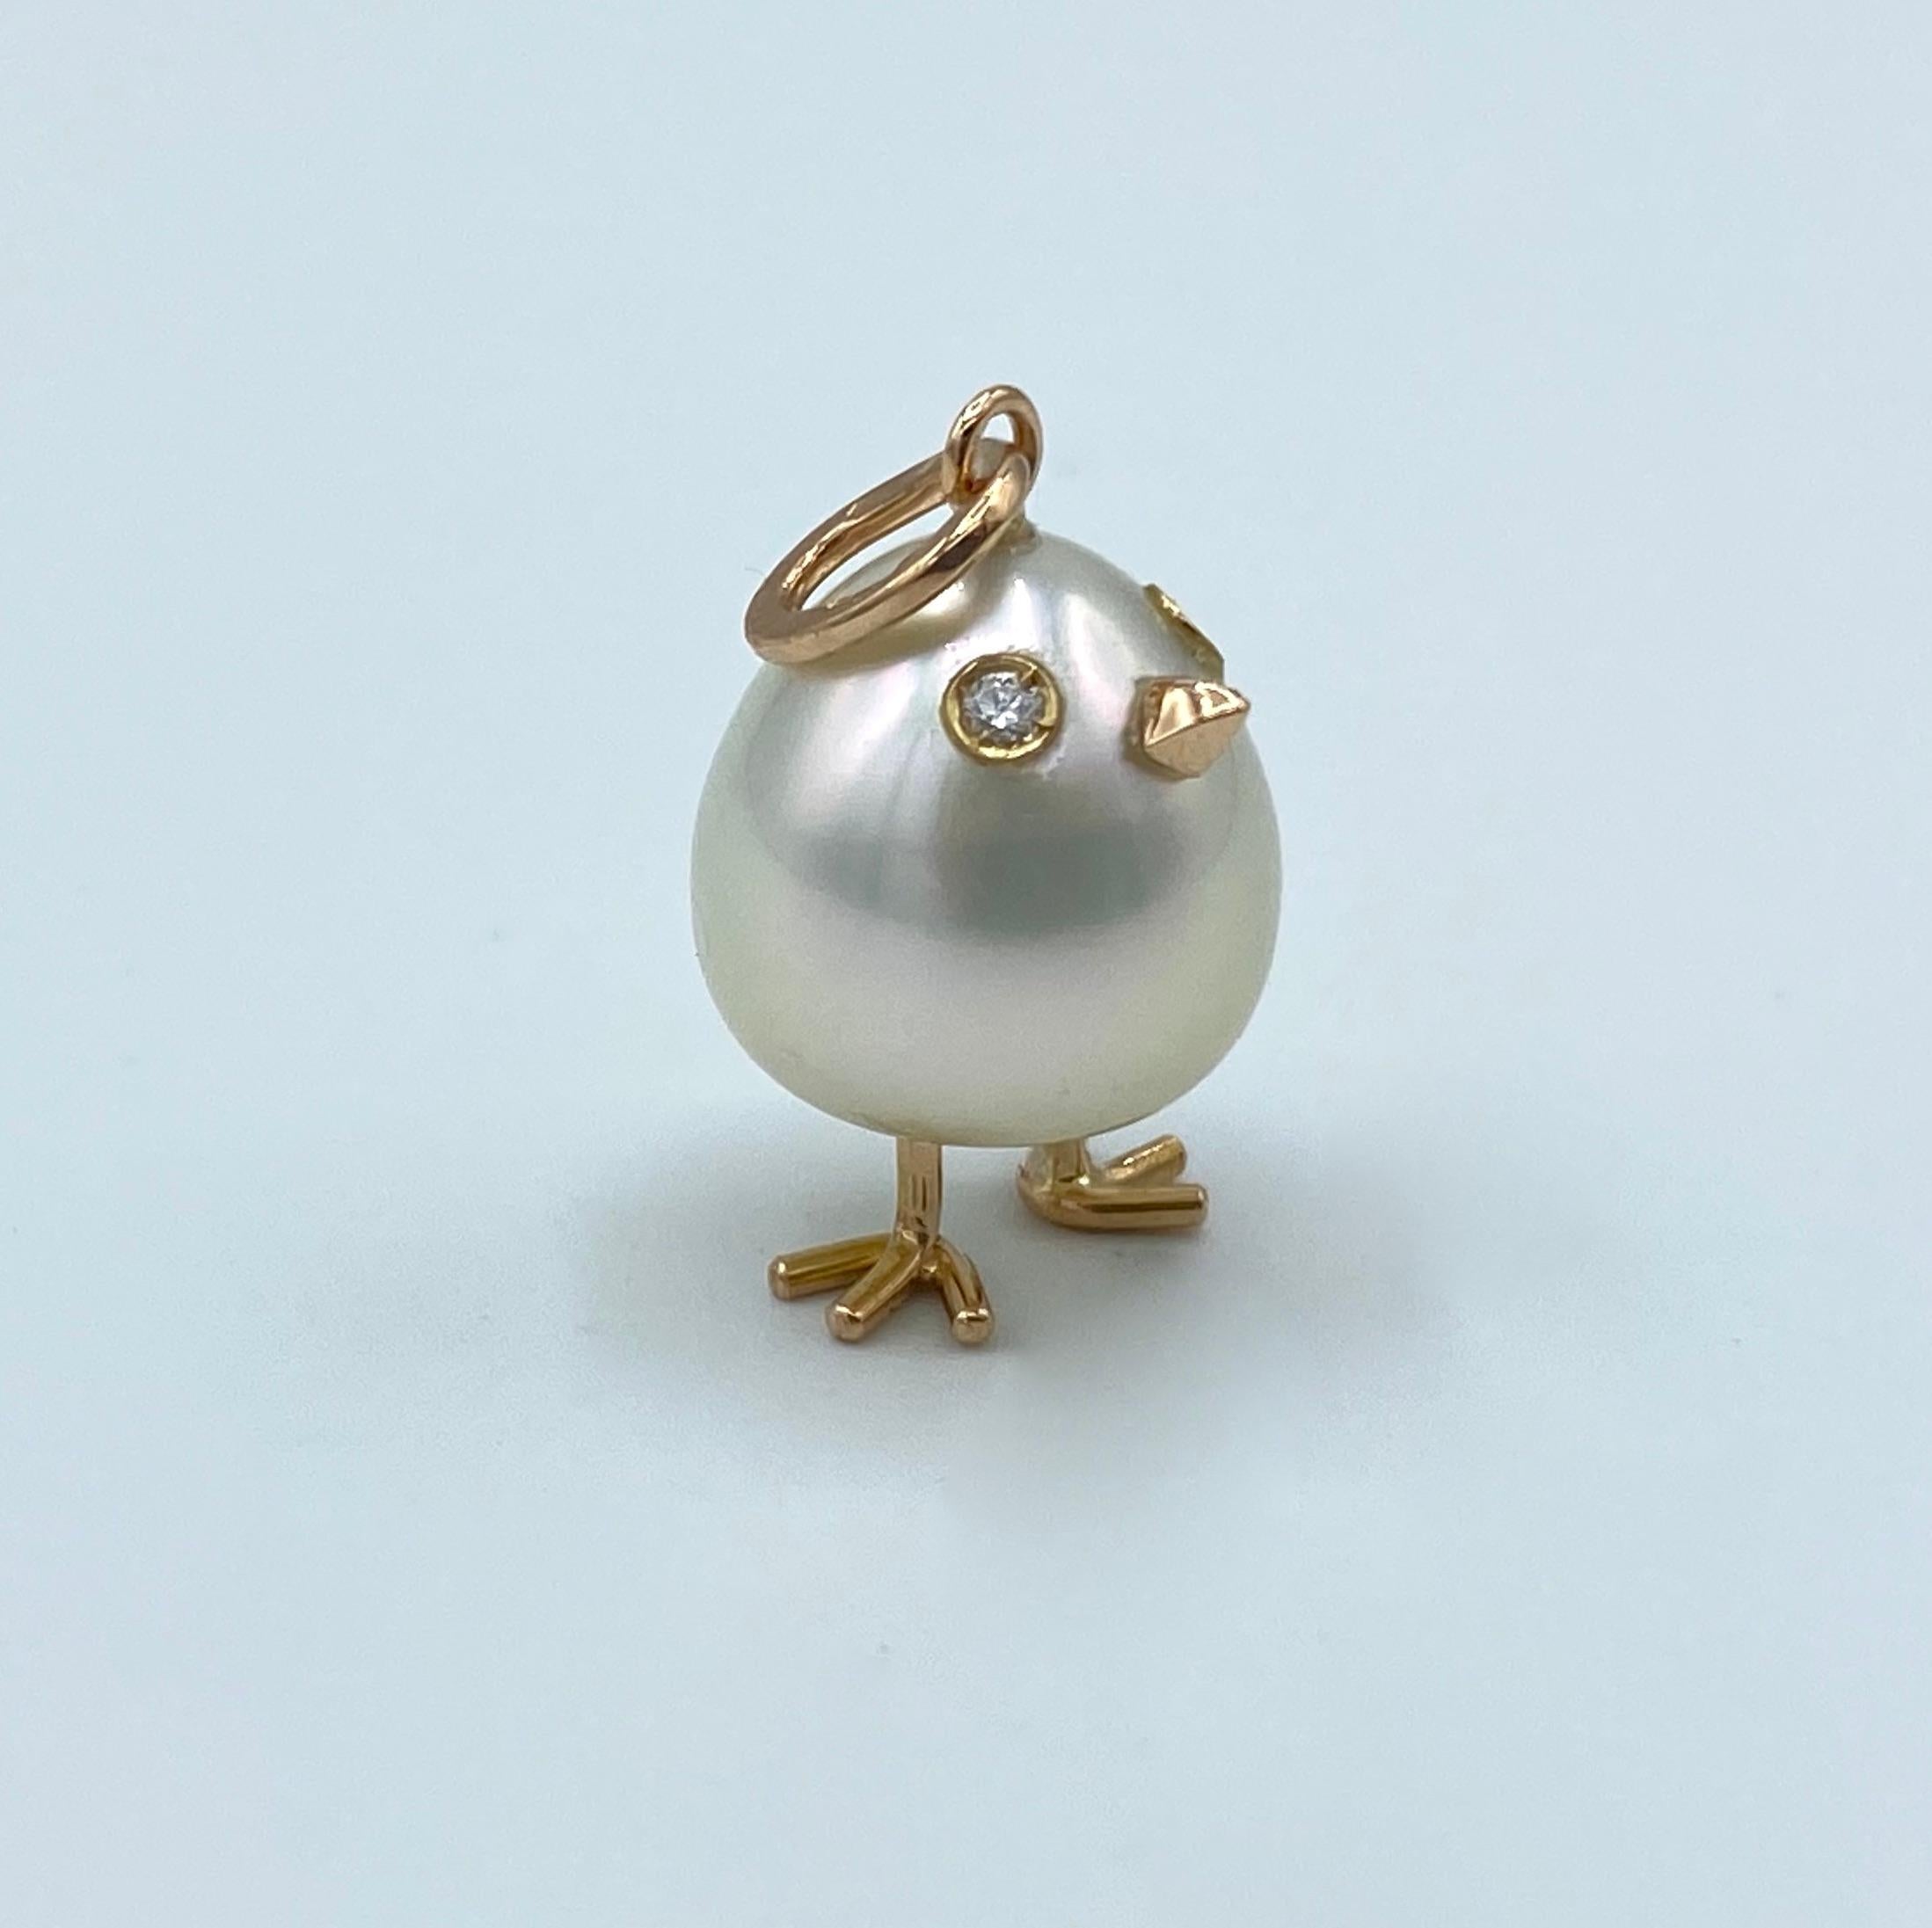 Chick Australian Pearl Diamond Yellow Red white 18 Kt Gold Pendant or Necklace
A oval shape Australian pearl has been carefully crafted to make a chick. He has his two legs, two eyes encrusted with two white diamonds and his beak. 
The gold is